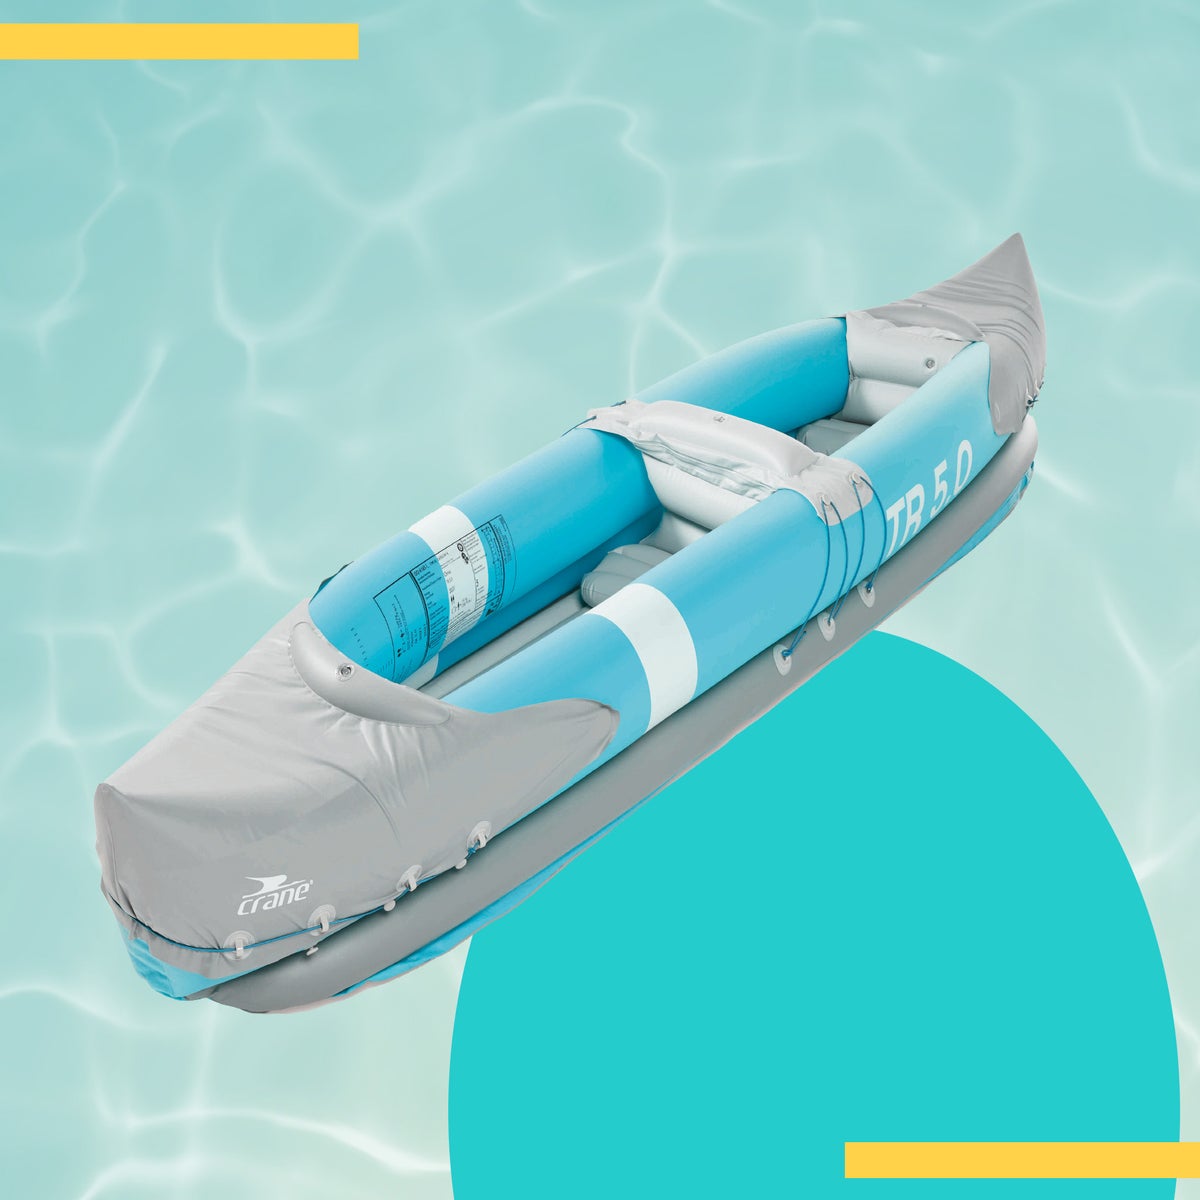 Inflatable Kayak - 2 person with accessories - sporting goods - by